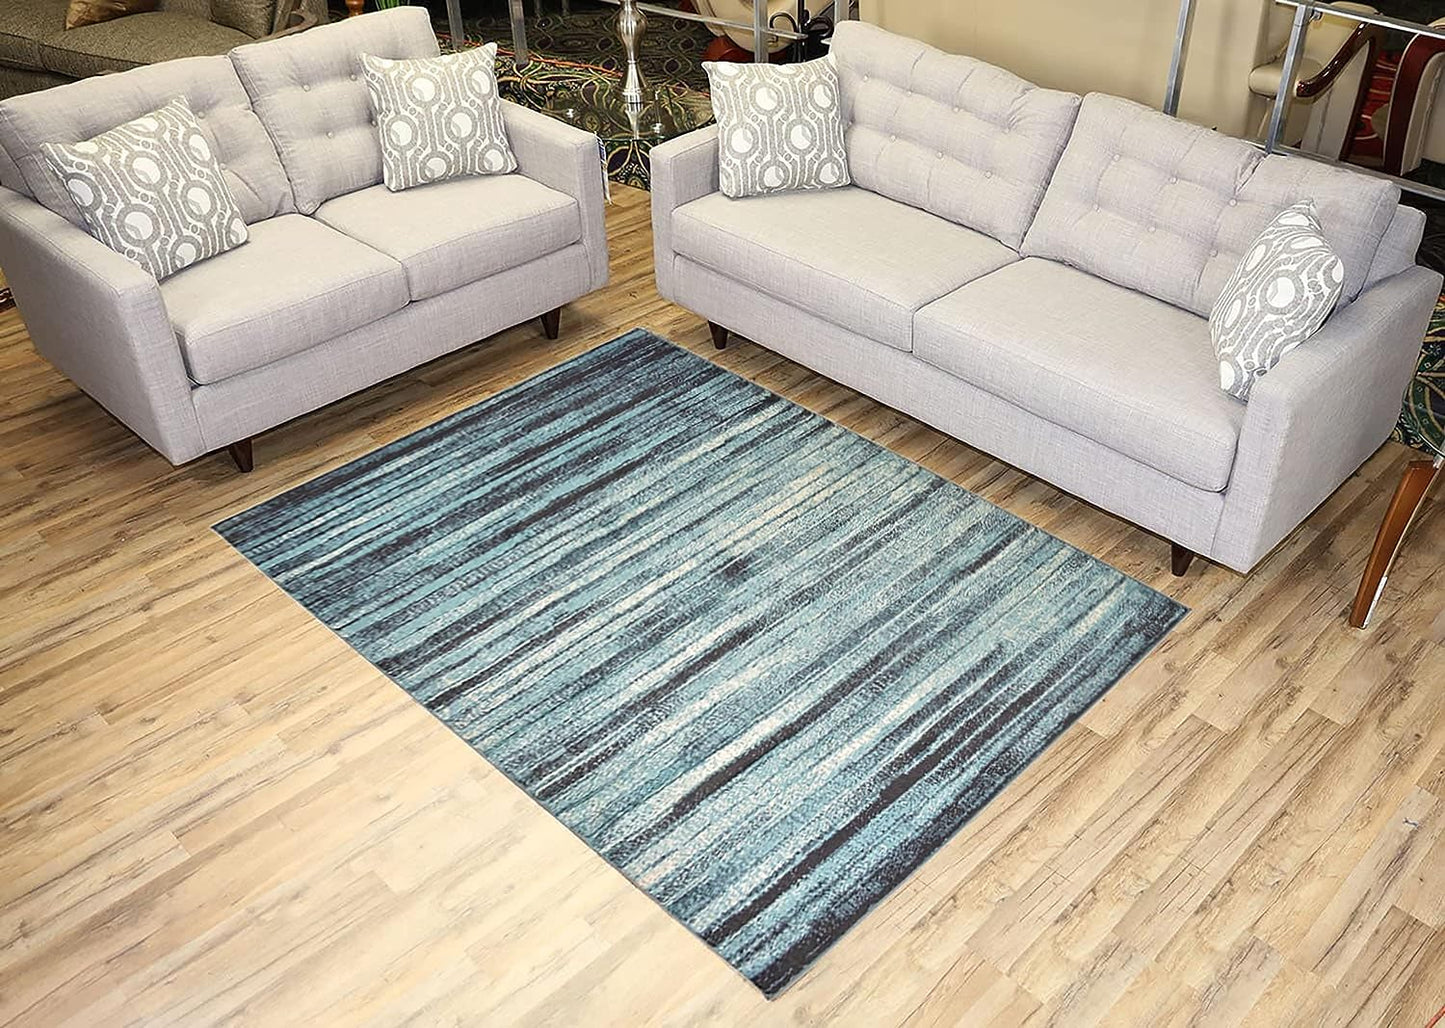 Studio Collection Vintage Distressed Stripes Abstract Design Contemporary Modern Area Rug (Stripes Aqua Blue, 5 x 7)